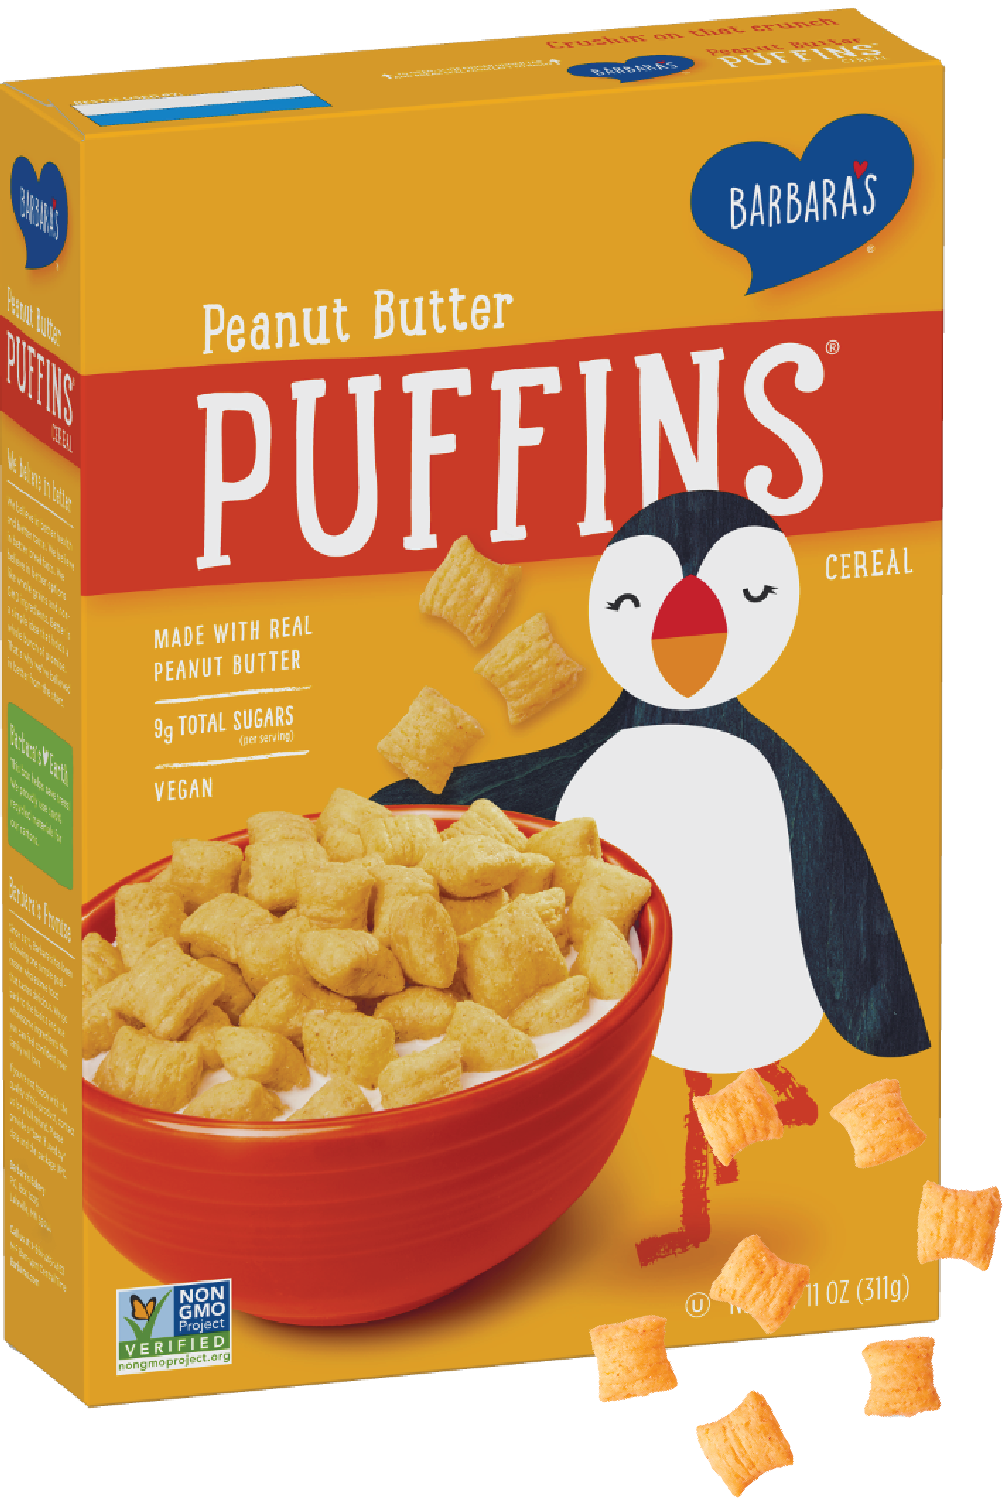 Peanut Butter Puffins by Barbara’s, 312g